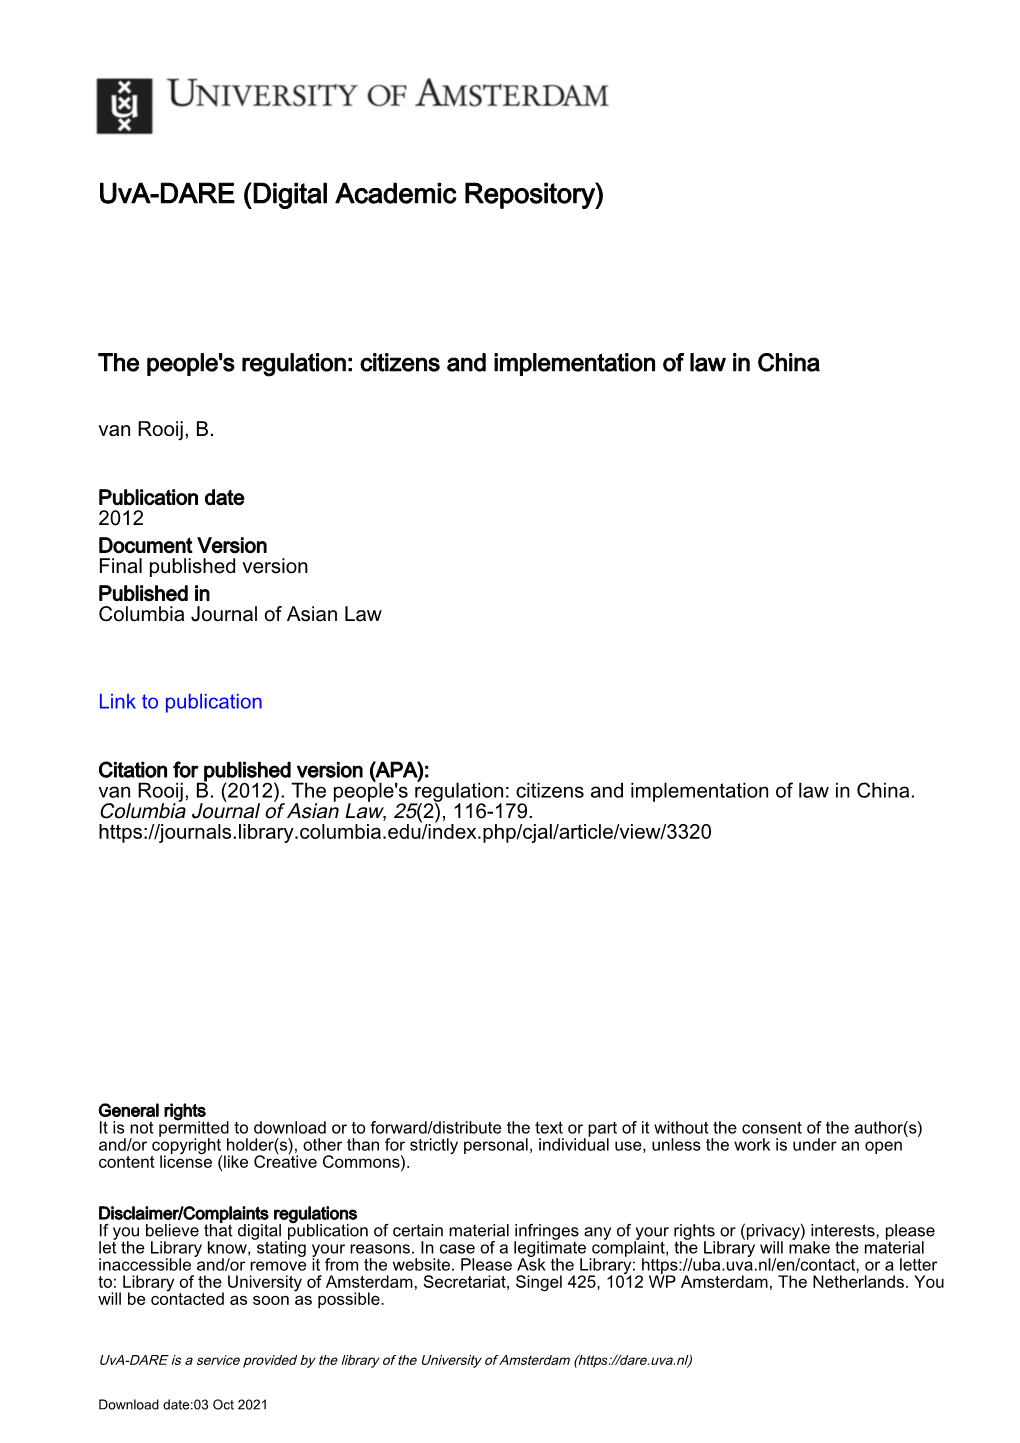 CITIZENS and IMPLEMENTATION of LAW in CHINA Benjamin Van Rooij